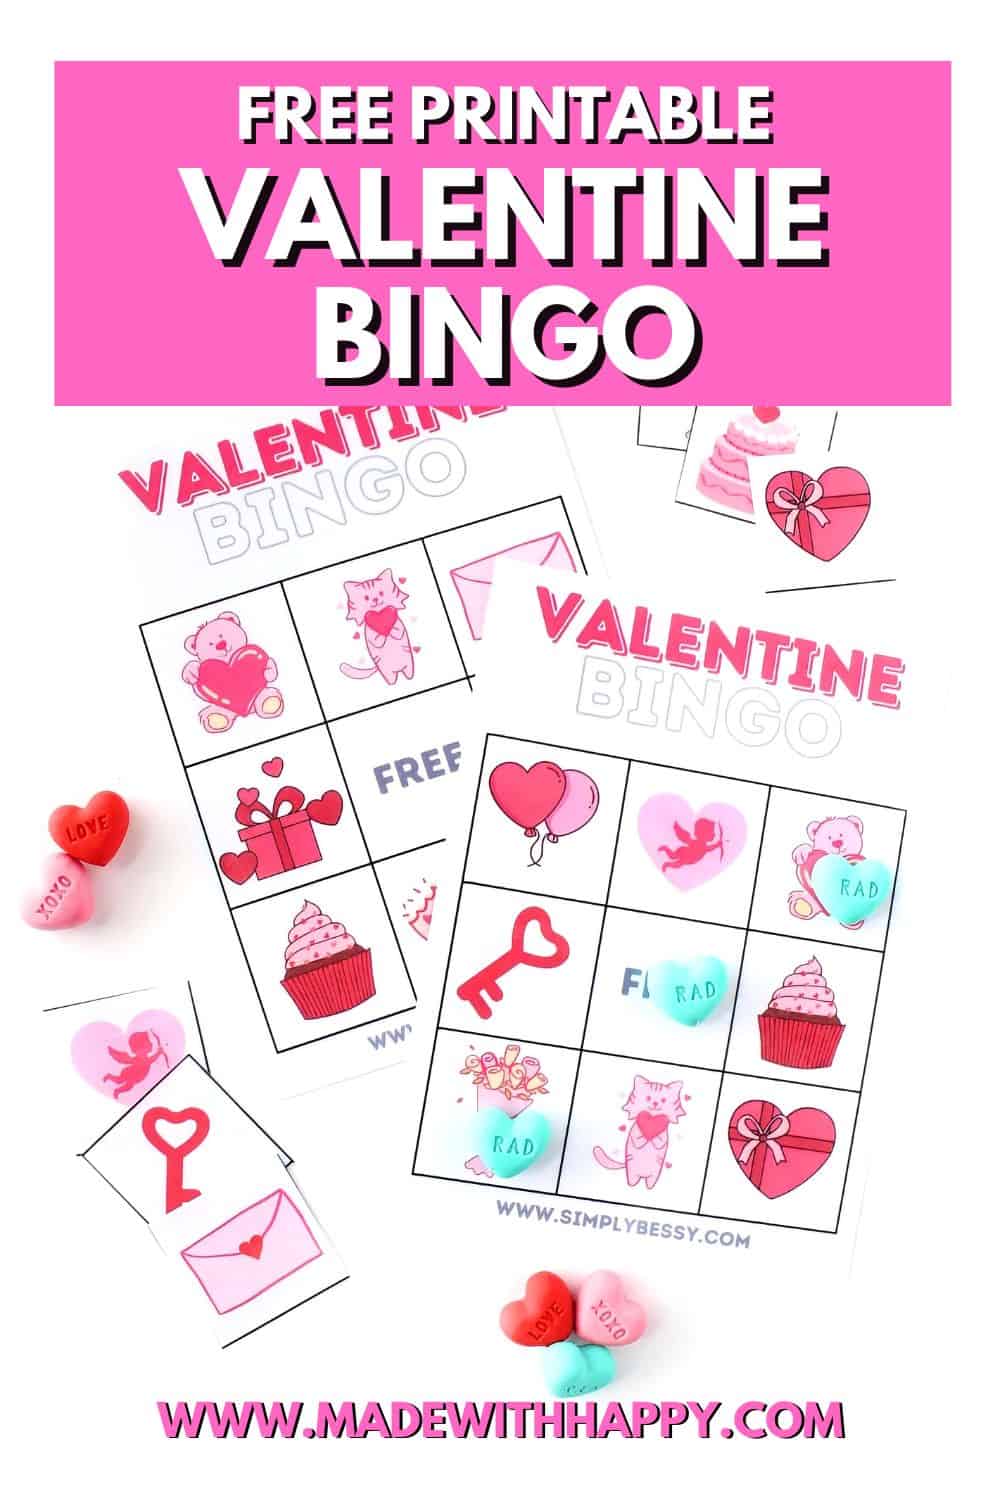 Valentine Bingo Free Printable Game For Kids Made With HAPPY